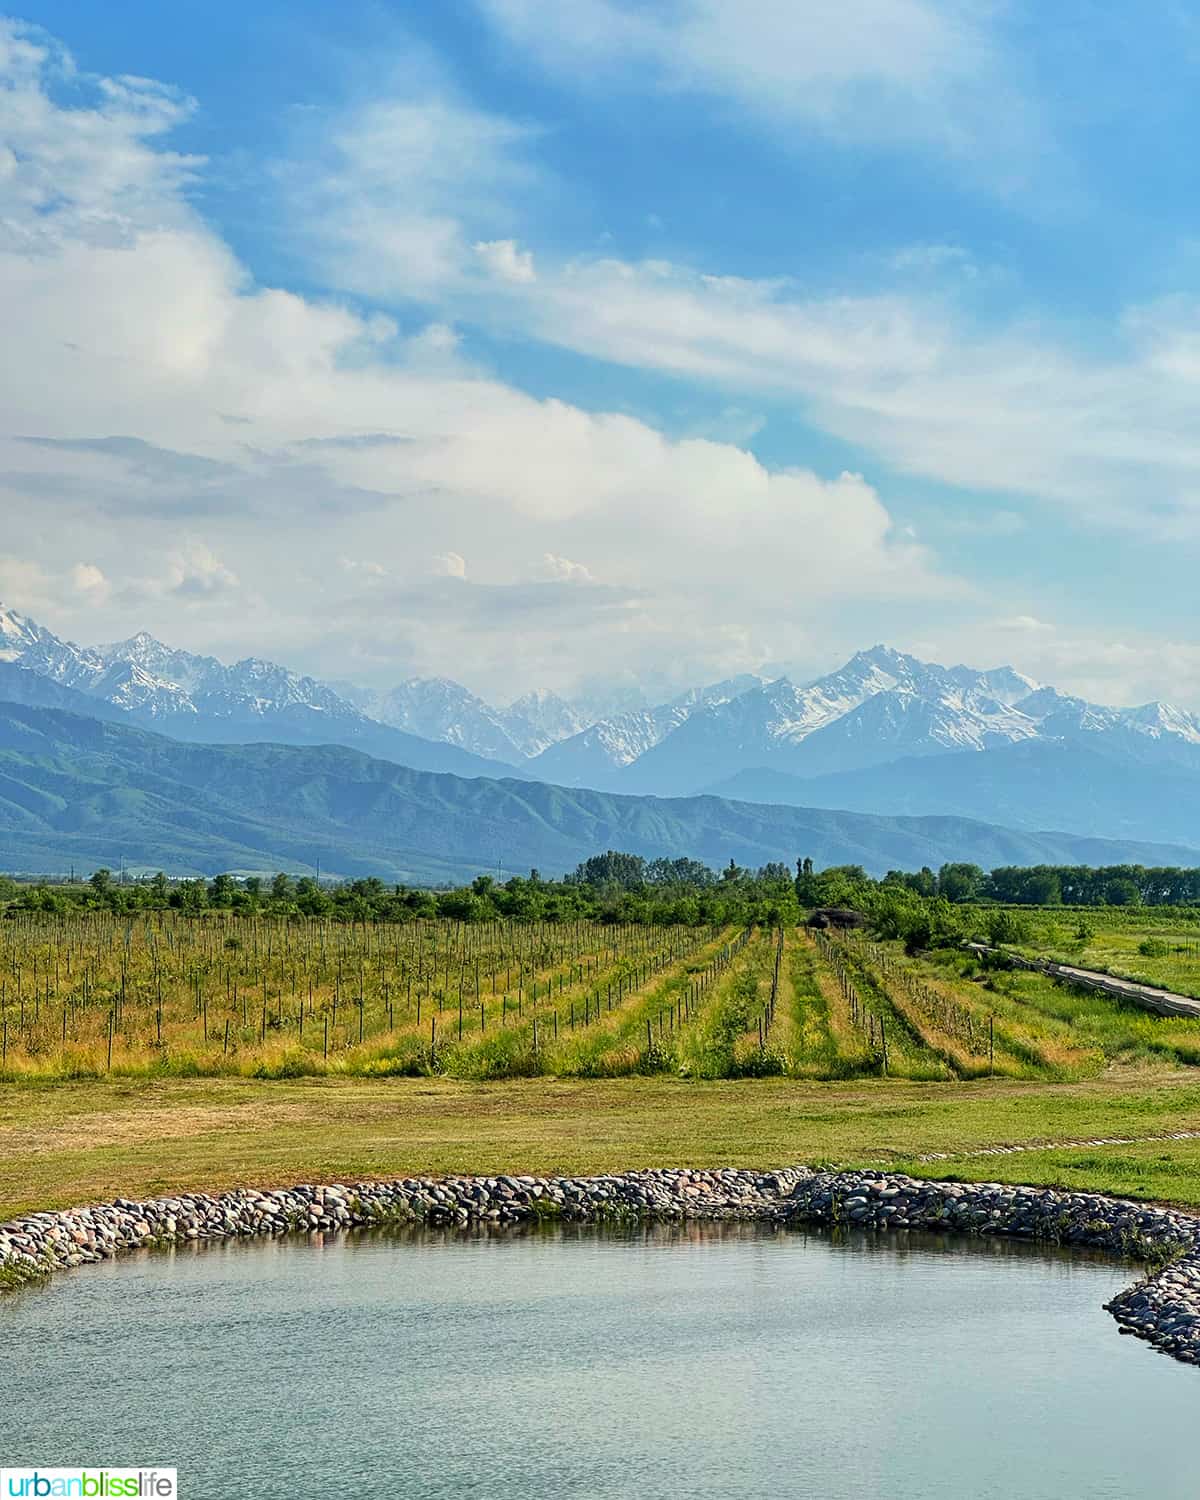 beautiful Arba winery vineyards near Almaty, Kazakhstan with the Tien Shan Mountains in the background.